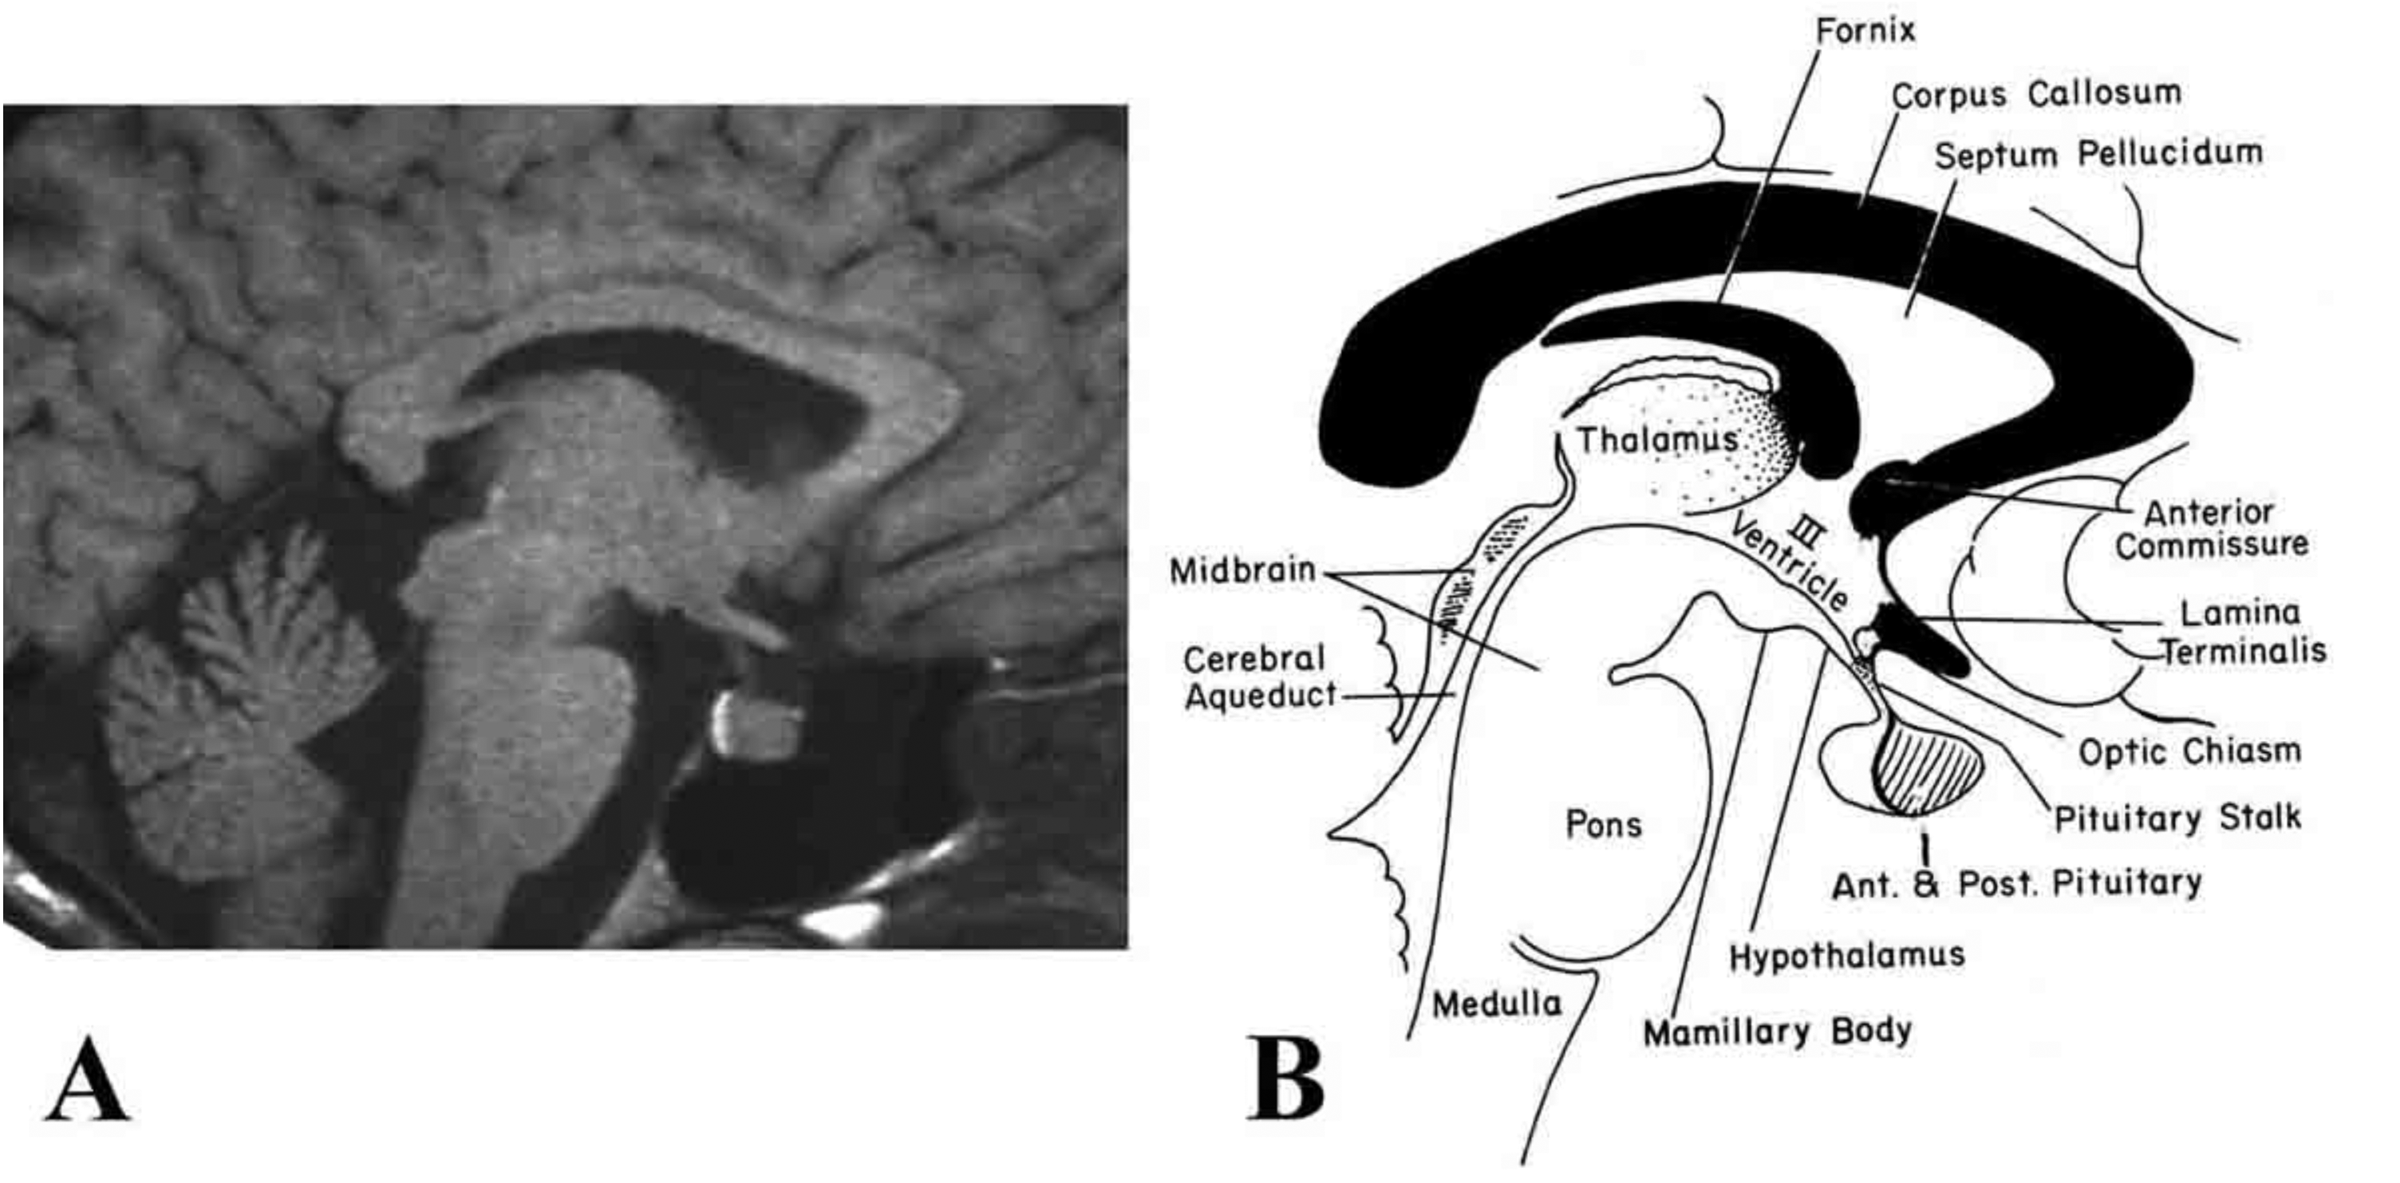 Fig. 6. (A) Magnetic resonance image (MRI) and (B) corresponding schematic illustration of the human hypothalamus (H) and pituitary gland seen in saggital orientation. Note the high intensity or "bright spot" of the posterior pituitary by MRI in (A), sharply defining the boundary between the anterior pituitary gland. III = third ventricle (Modified from Lechan RM. Neuroendocrinology of Pituitary Hormone Regulation. Endocrinology and Metabolism Clinics 16:475-501, 1987.)